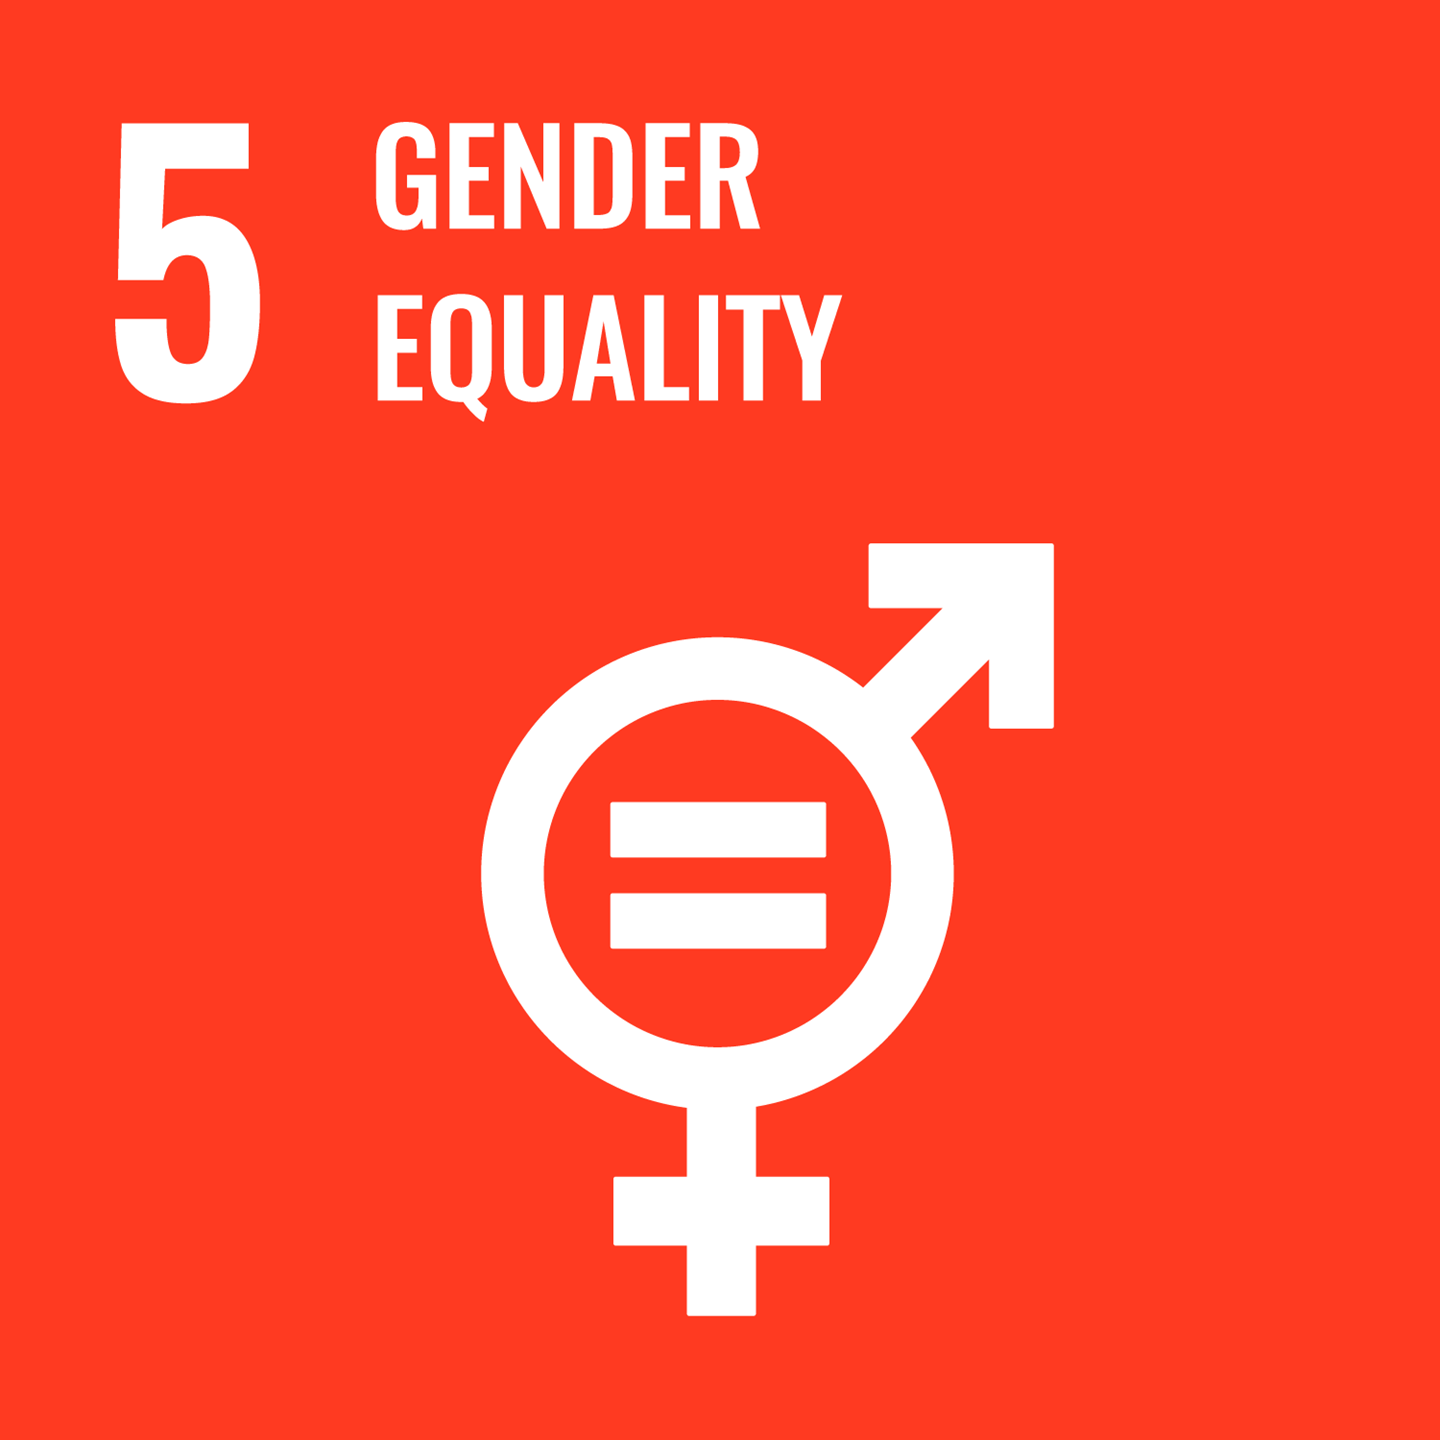 Sustainable Development Goal #5 - Gender Equality